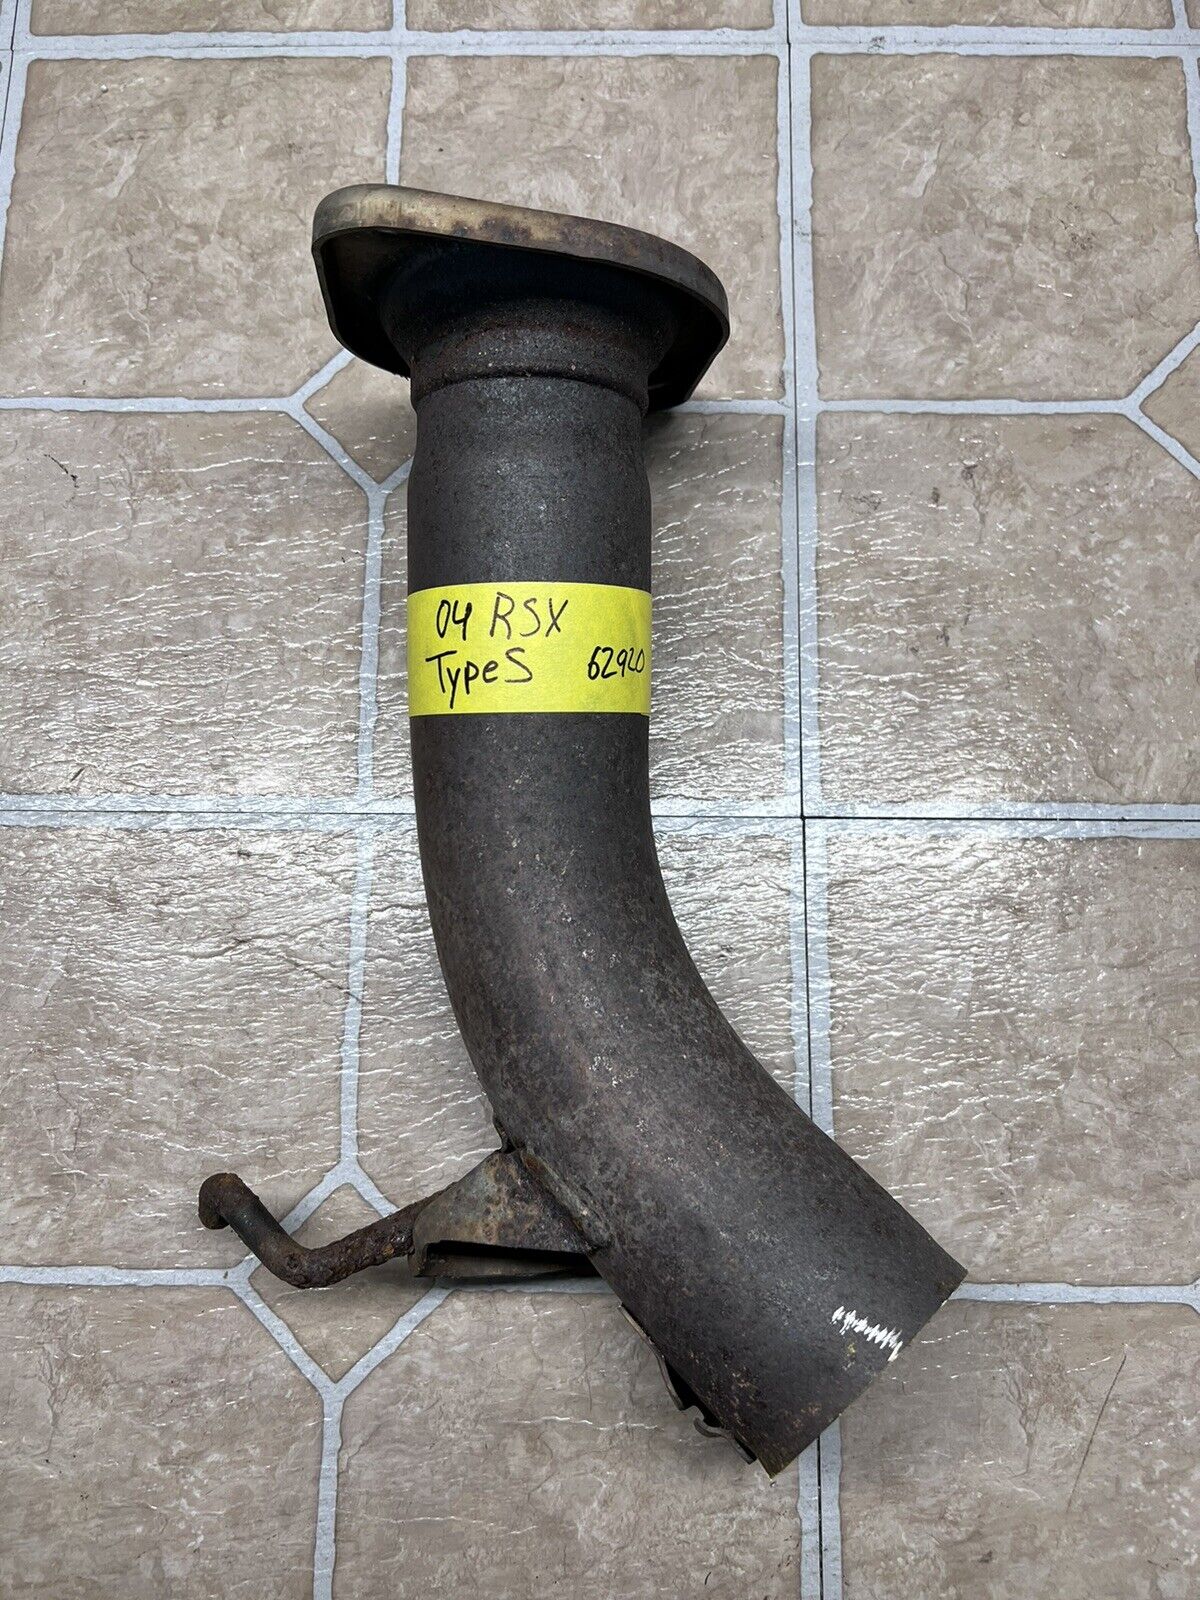 🔰02-06 ACURA RSX TYPE-S OEM Exhaust Downpipe Flange Manifold Extension Pipe🔰